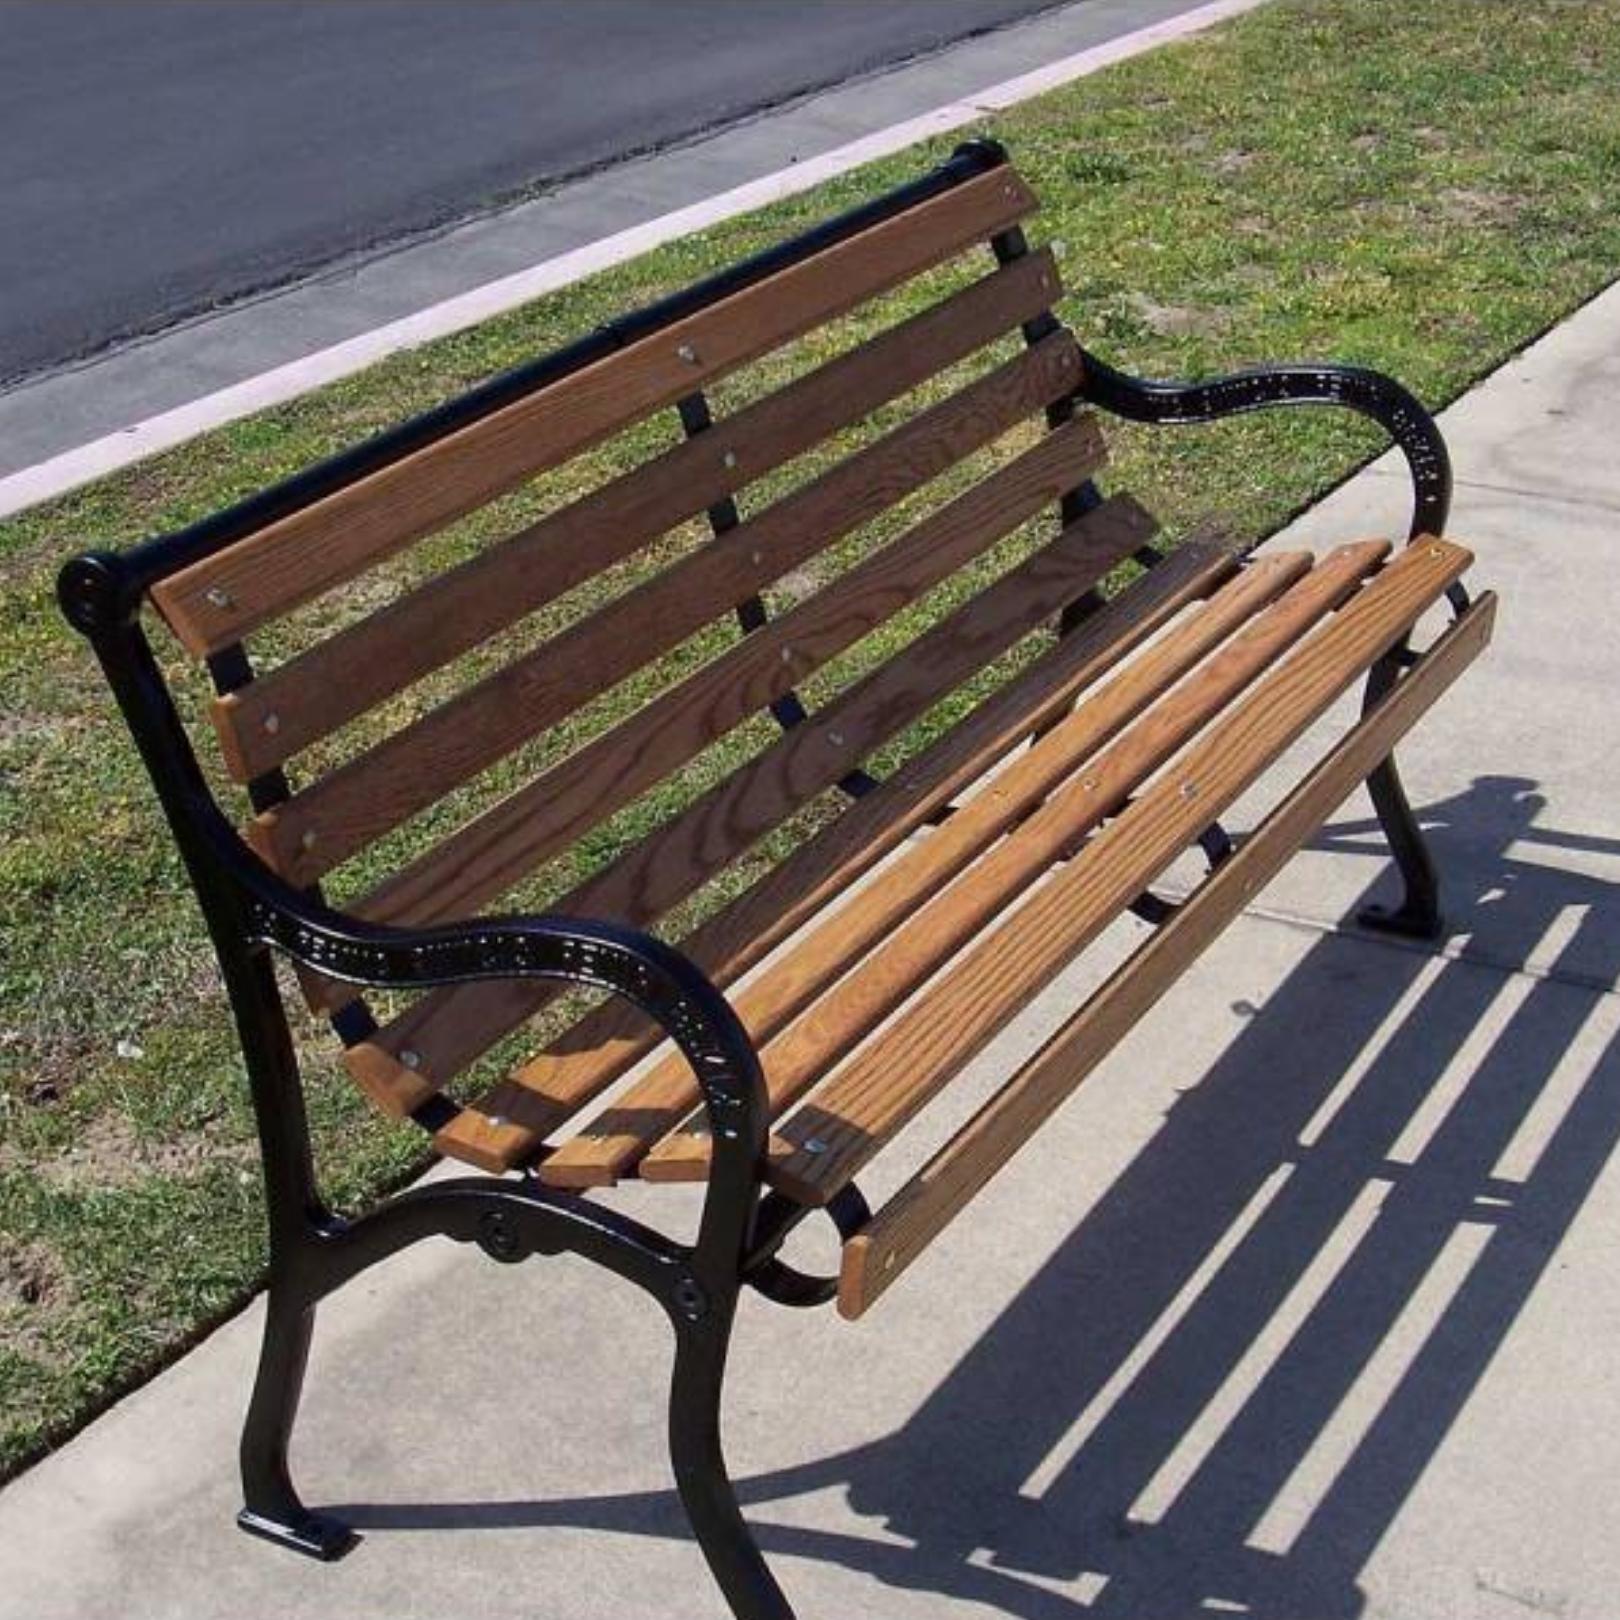 A photo of a bench